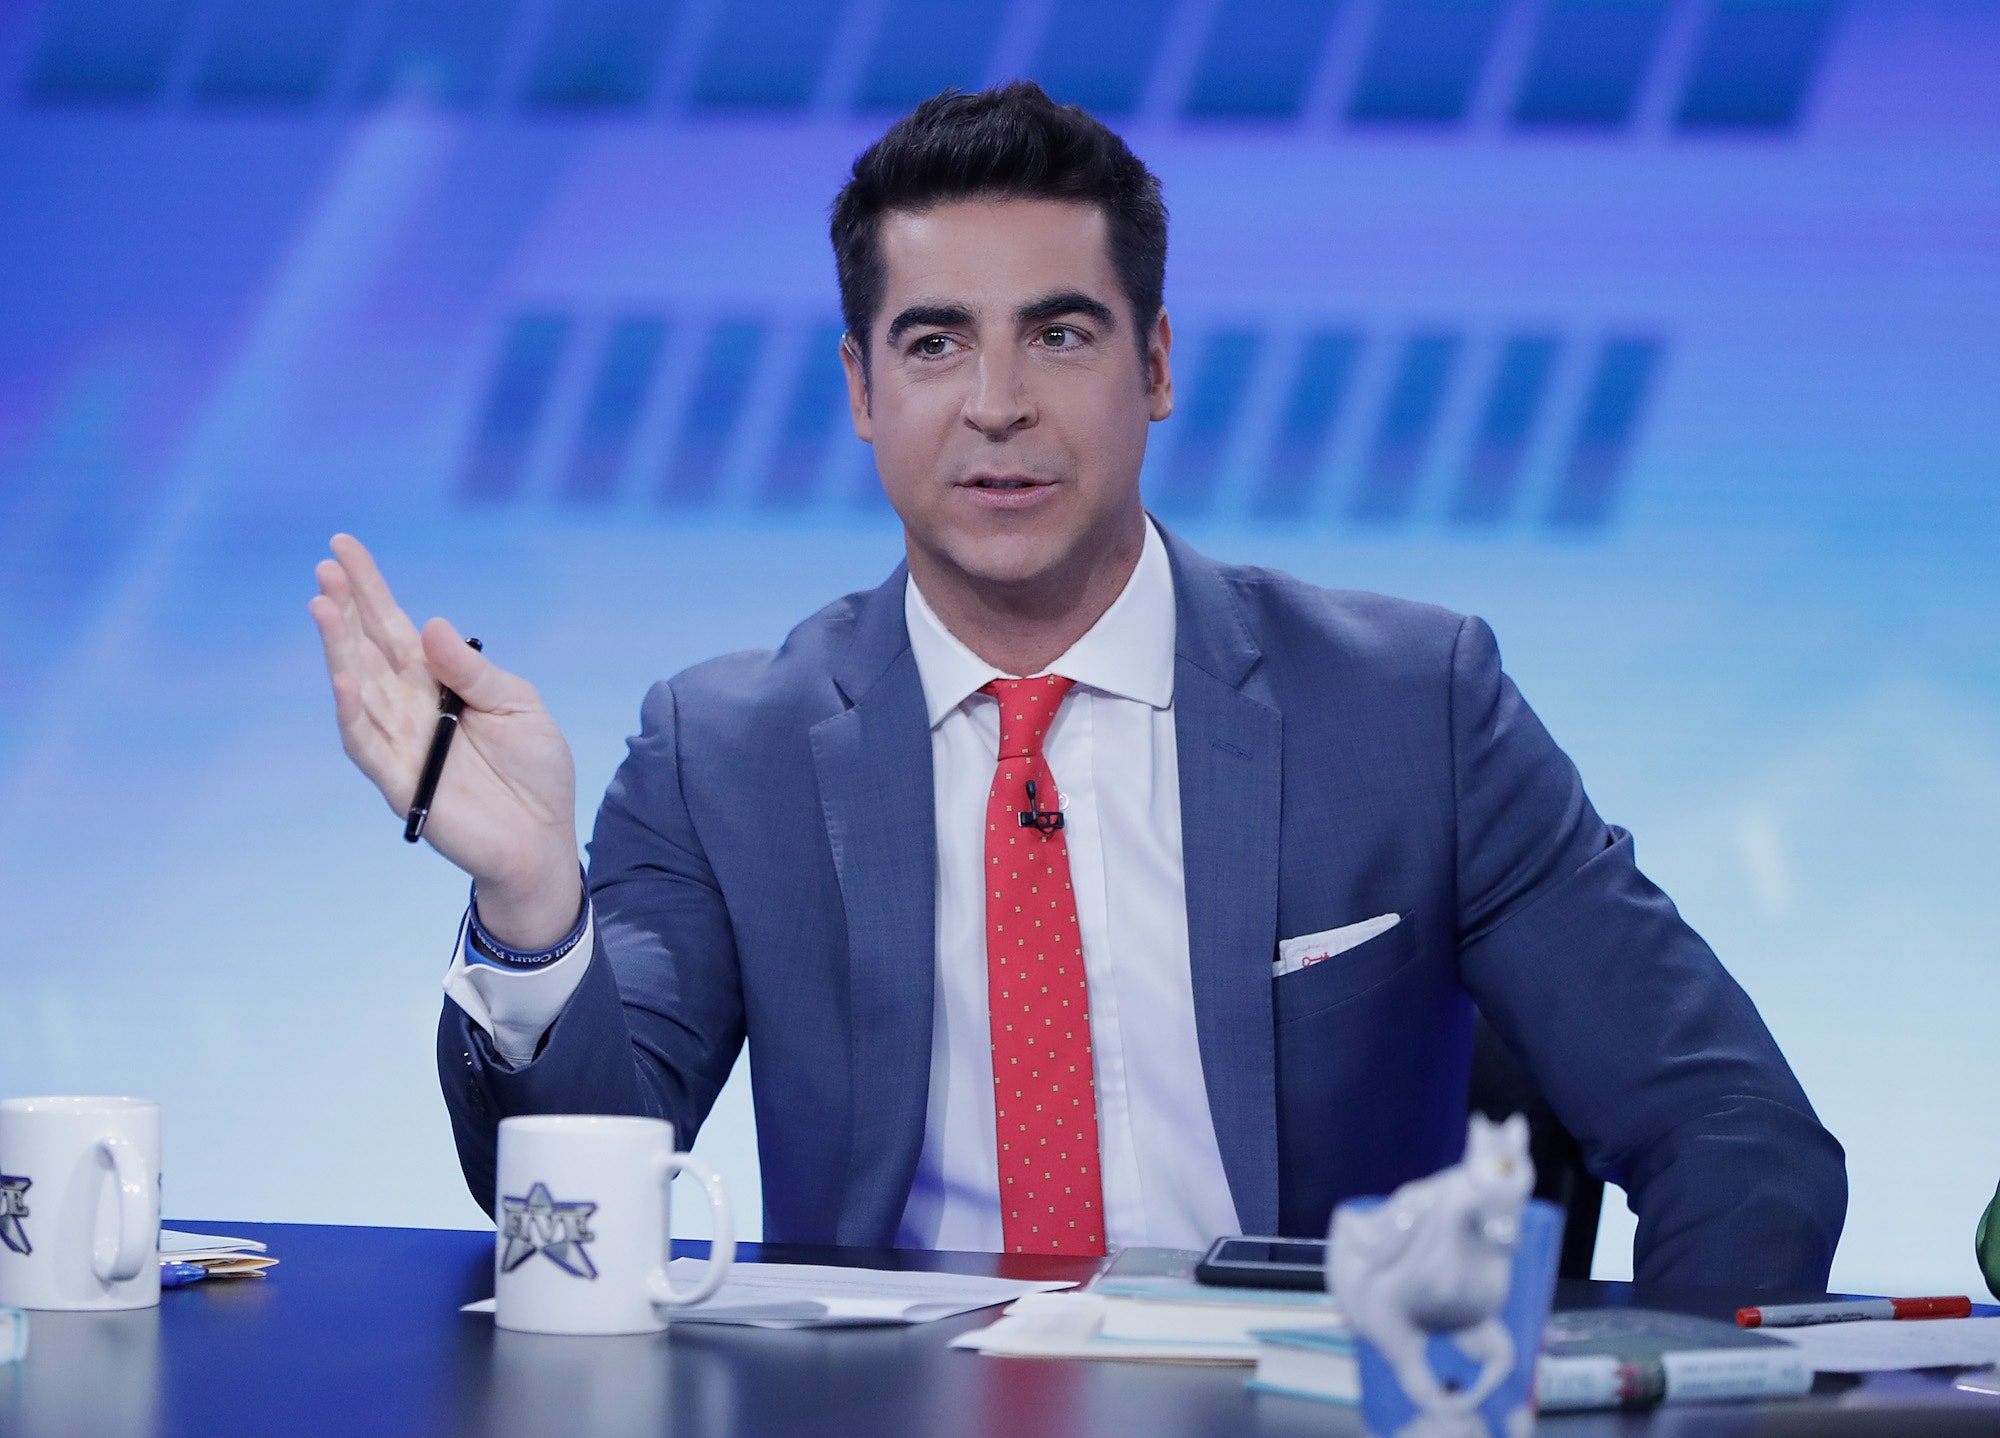 With Jesse Watters Primetime, Fox Dips Another Toe in the Populist Culture Wars